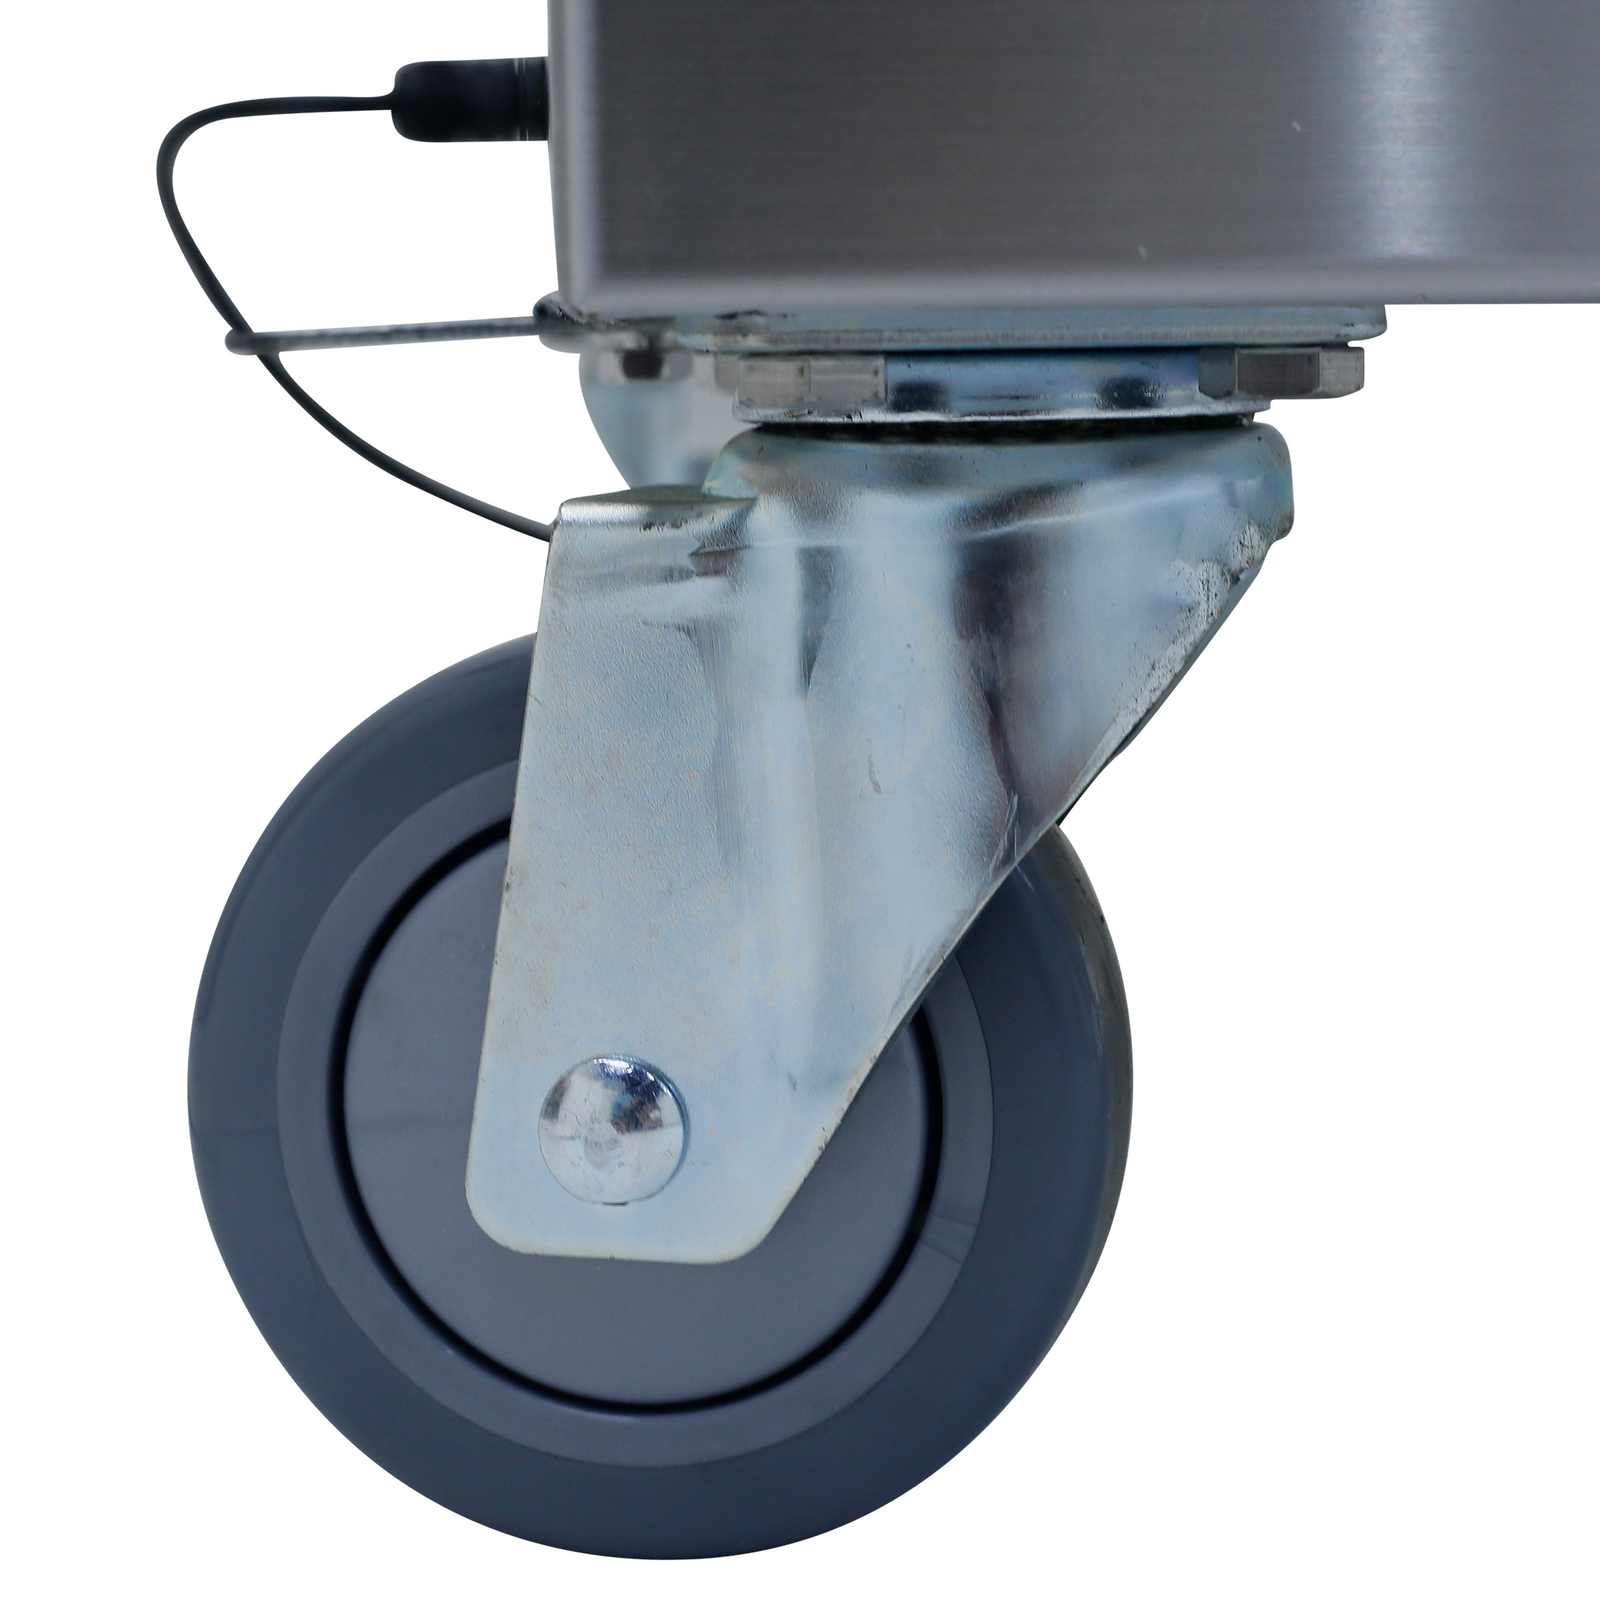 One of the wheels of the JORESTECH commercial single chamber vacuum sealer